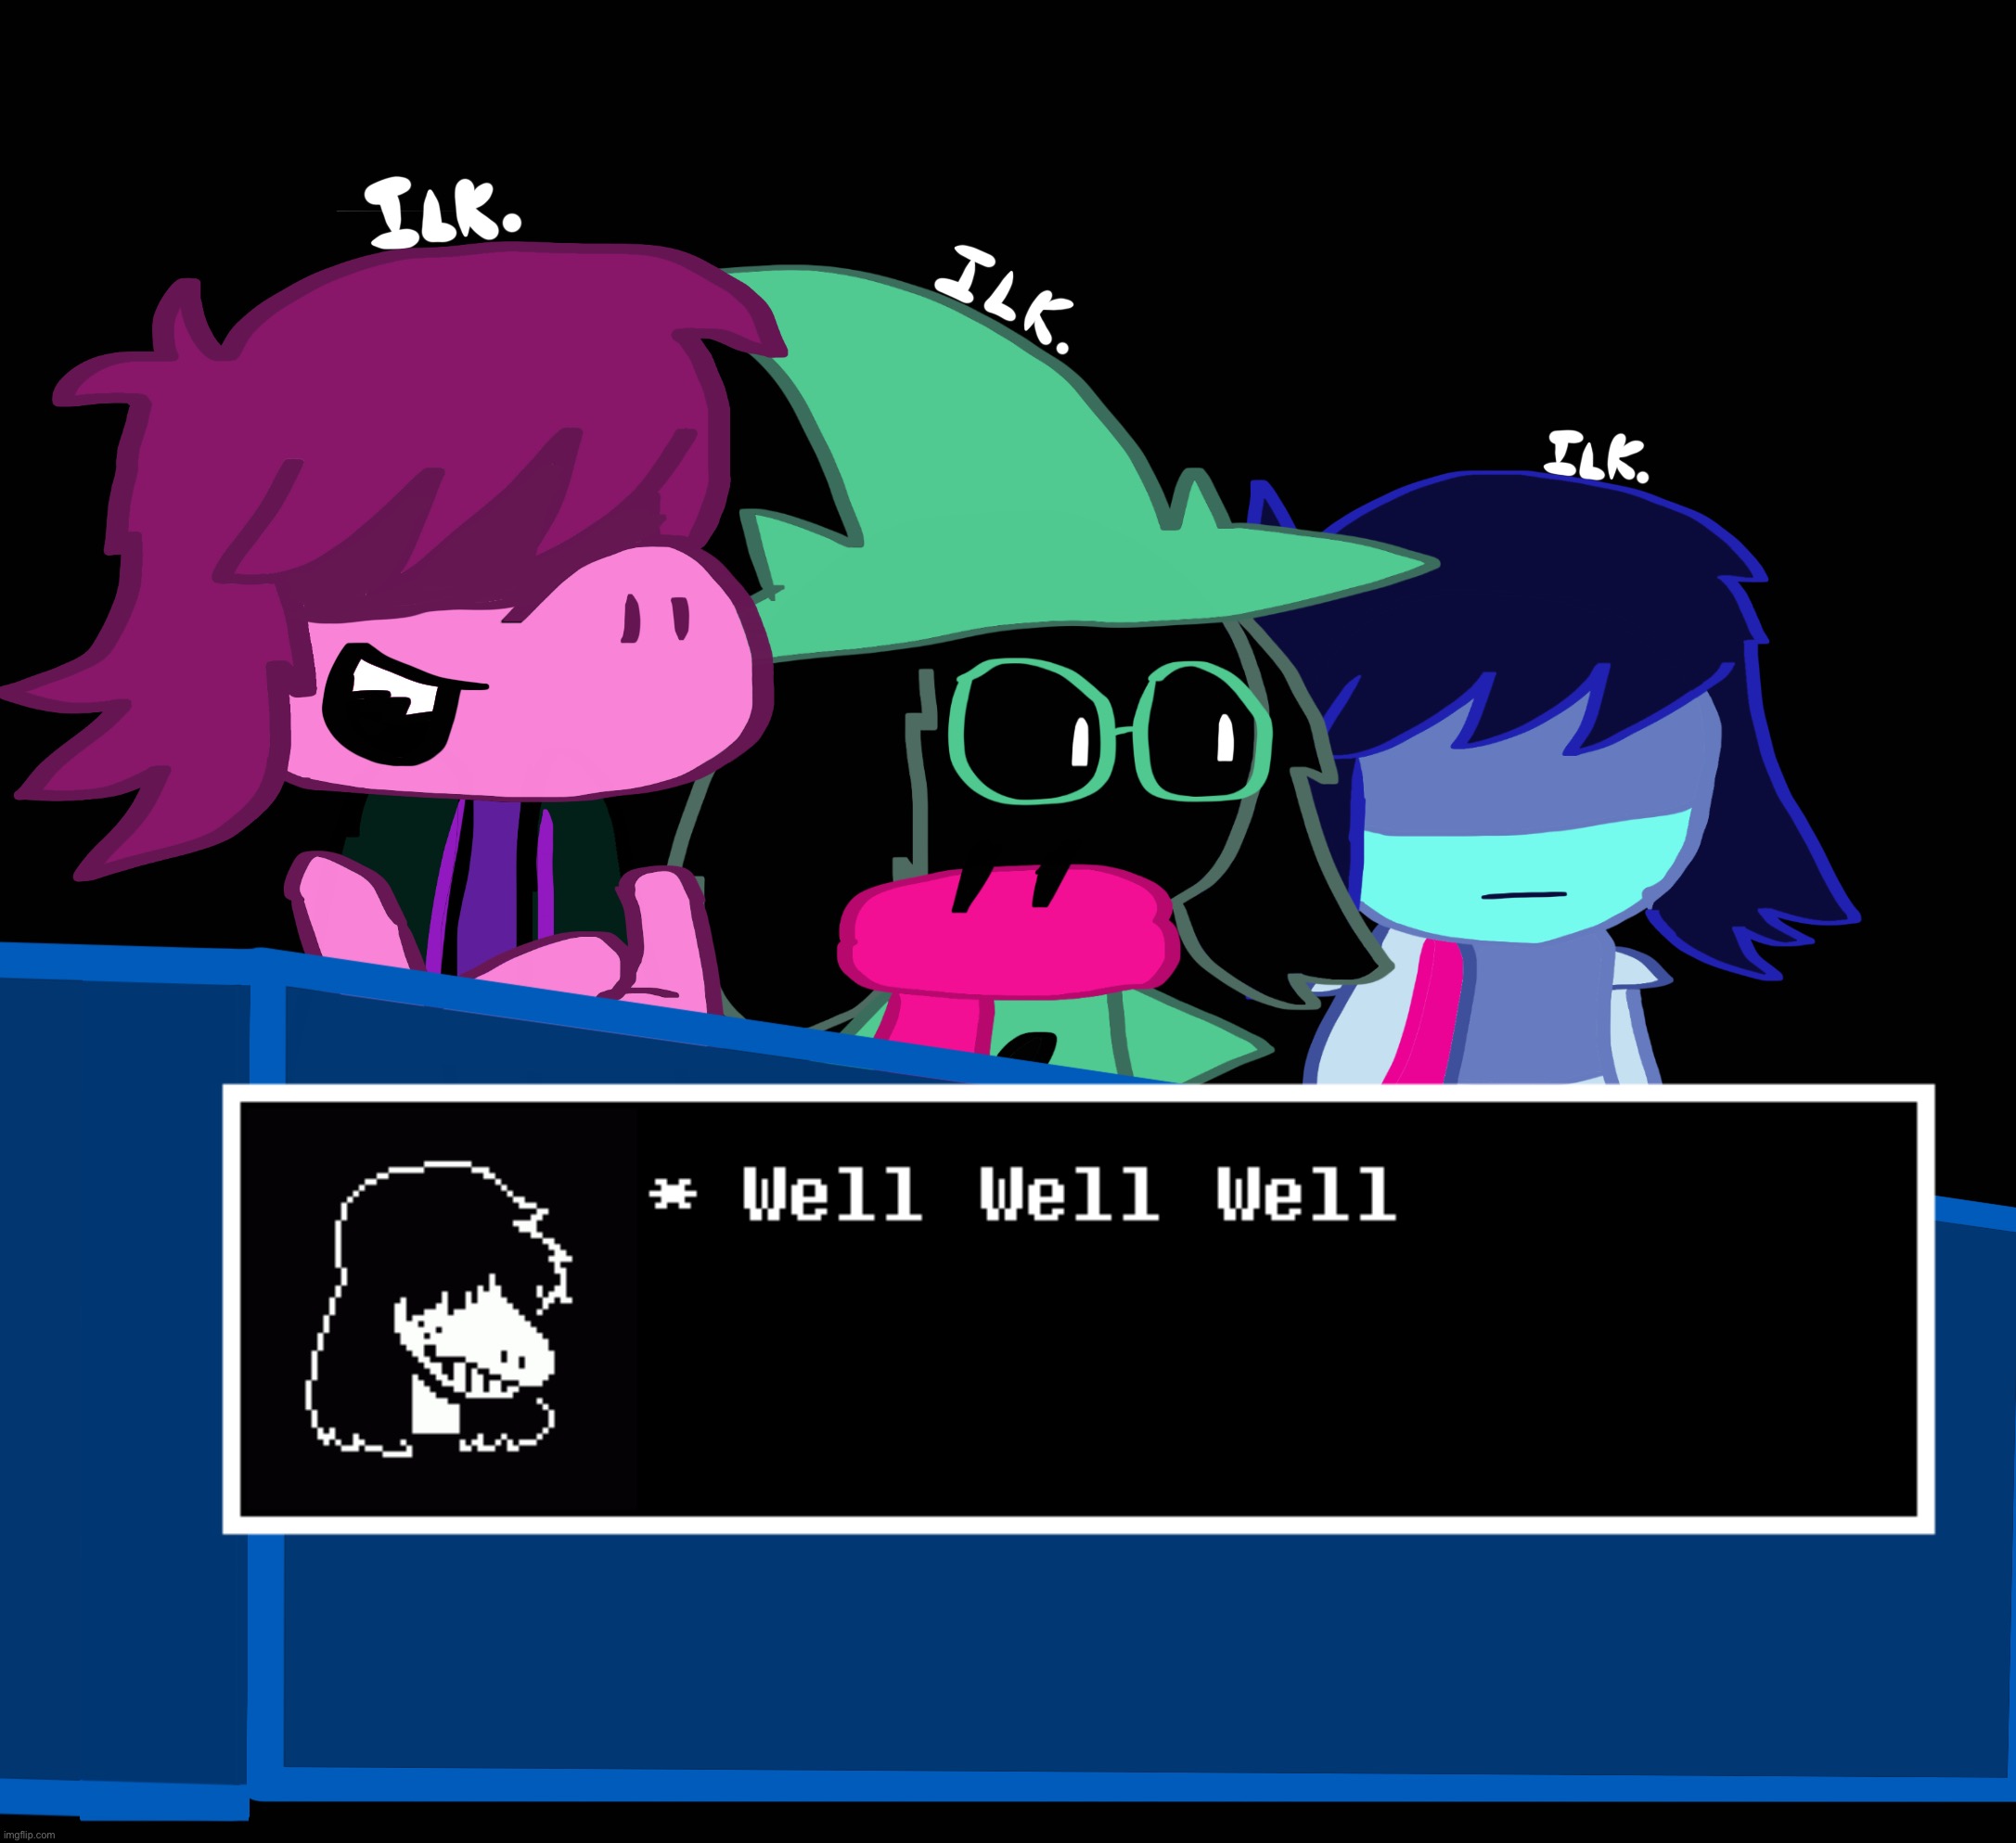 sorry not sorry | image tagged in eddsworld,friday night funkin,deltarune | made w/ Imgflip meme maker